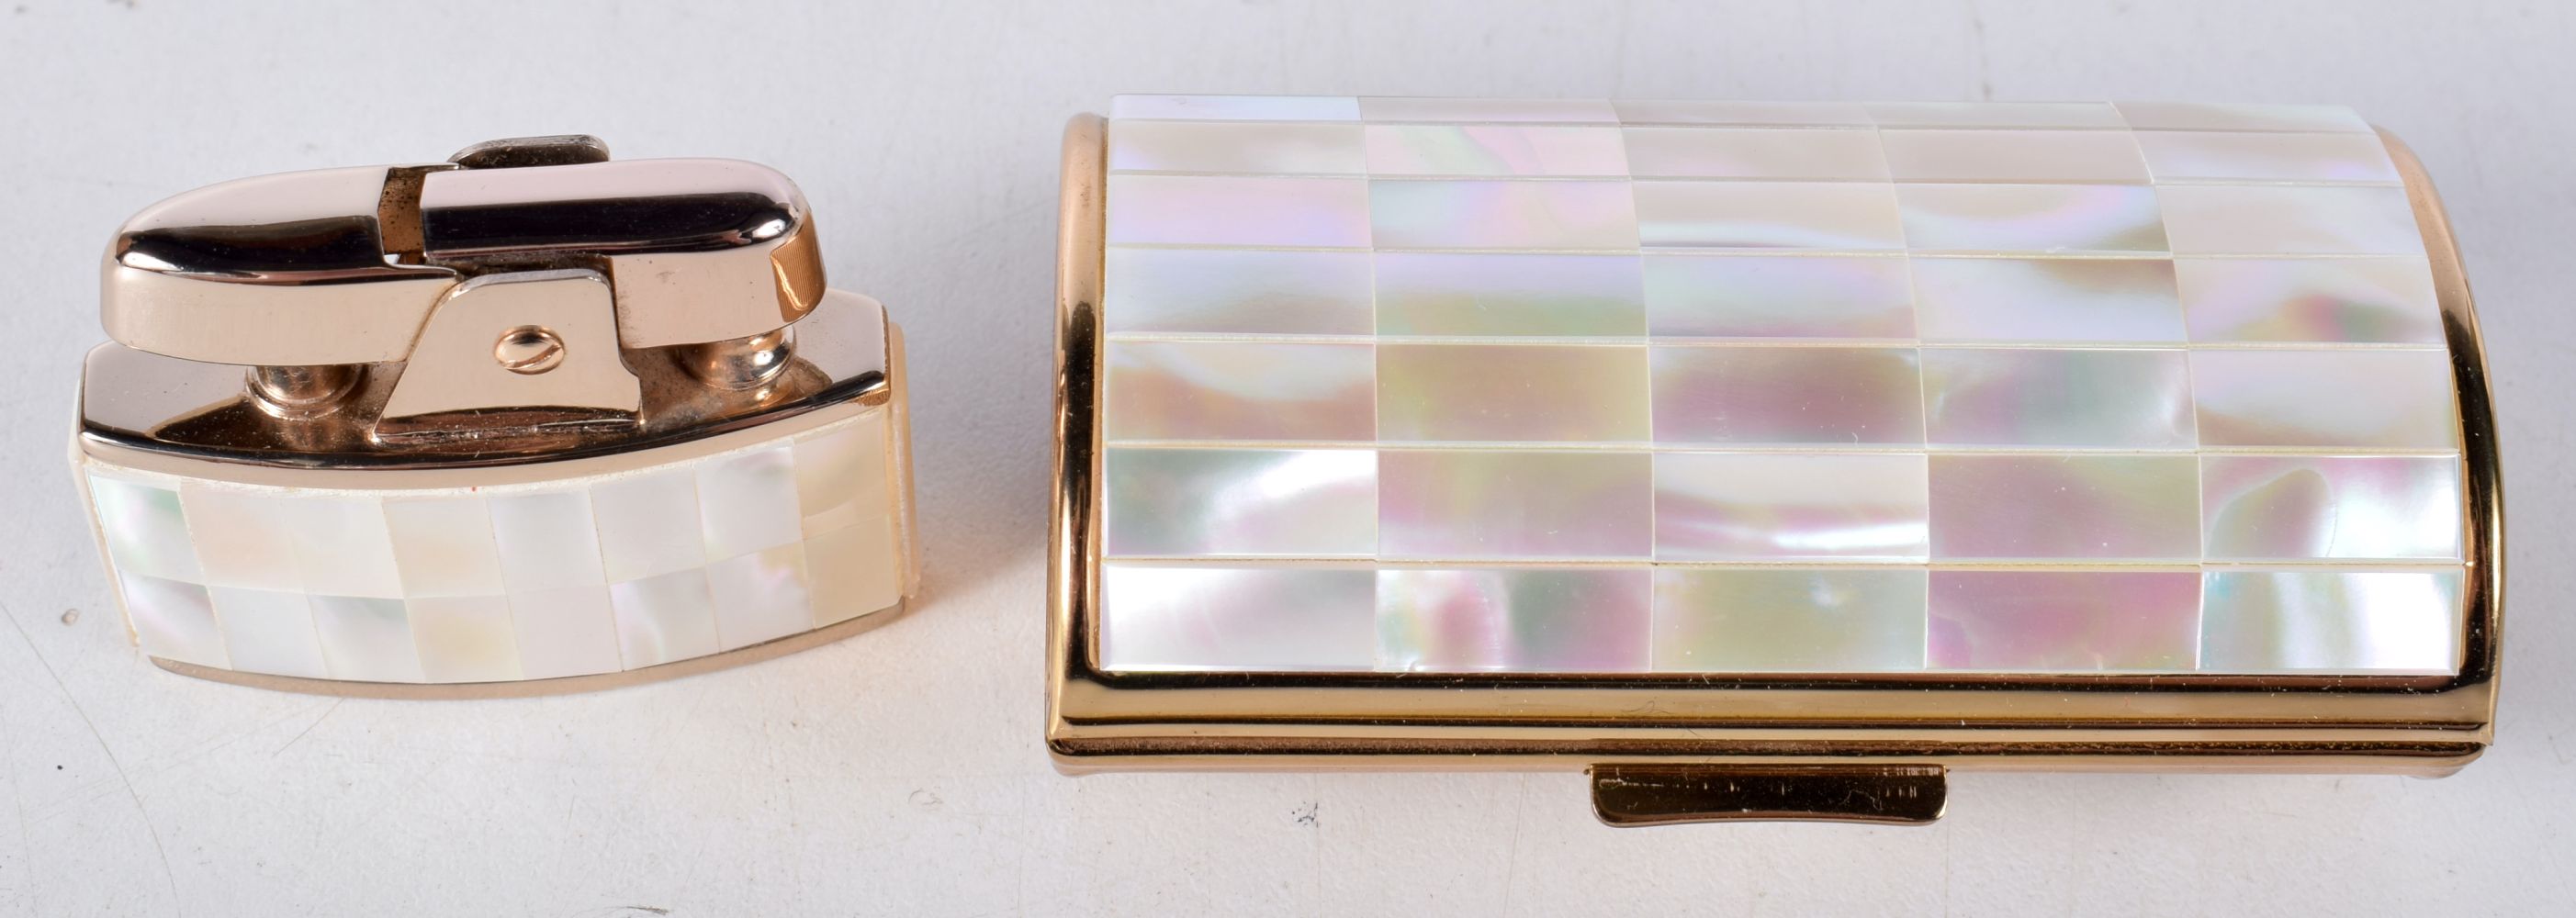 A boxed Ronson mother of Pearl decorated lighter set 4 x 14.4 x 12 cm. - Image 2 of 4